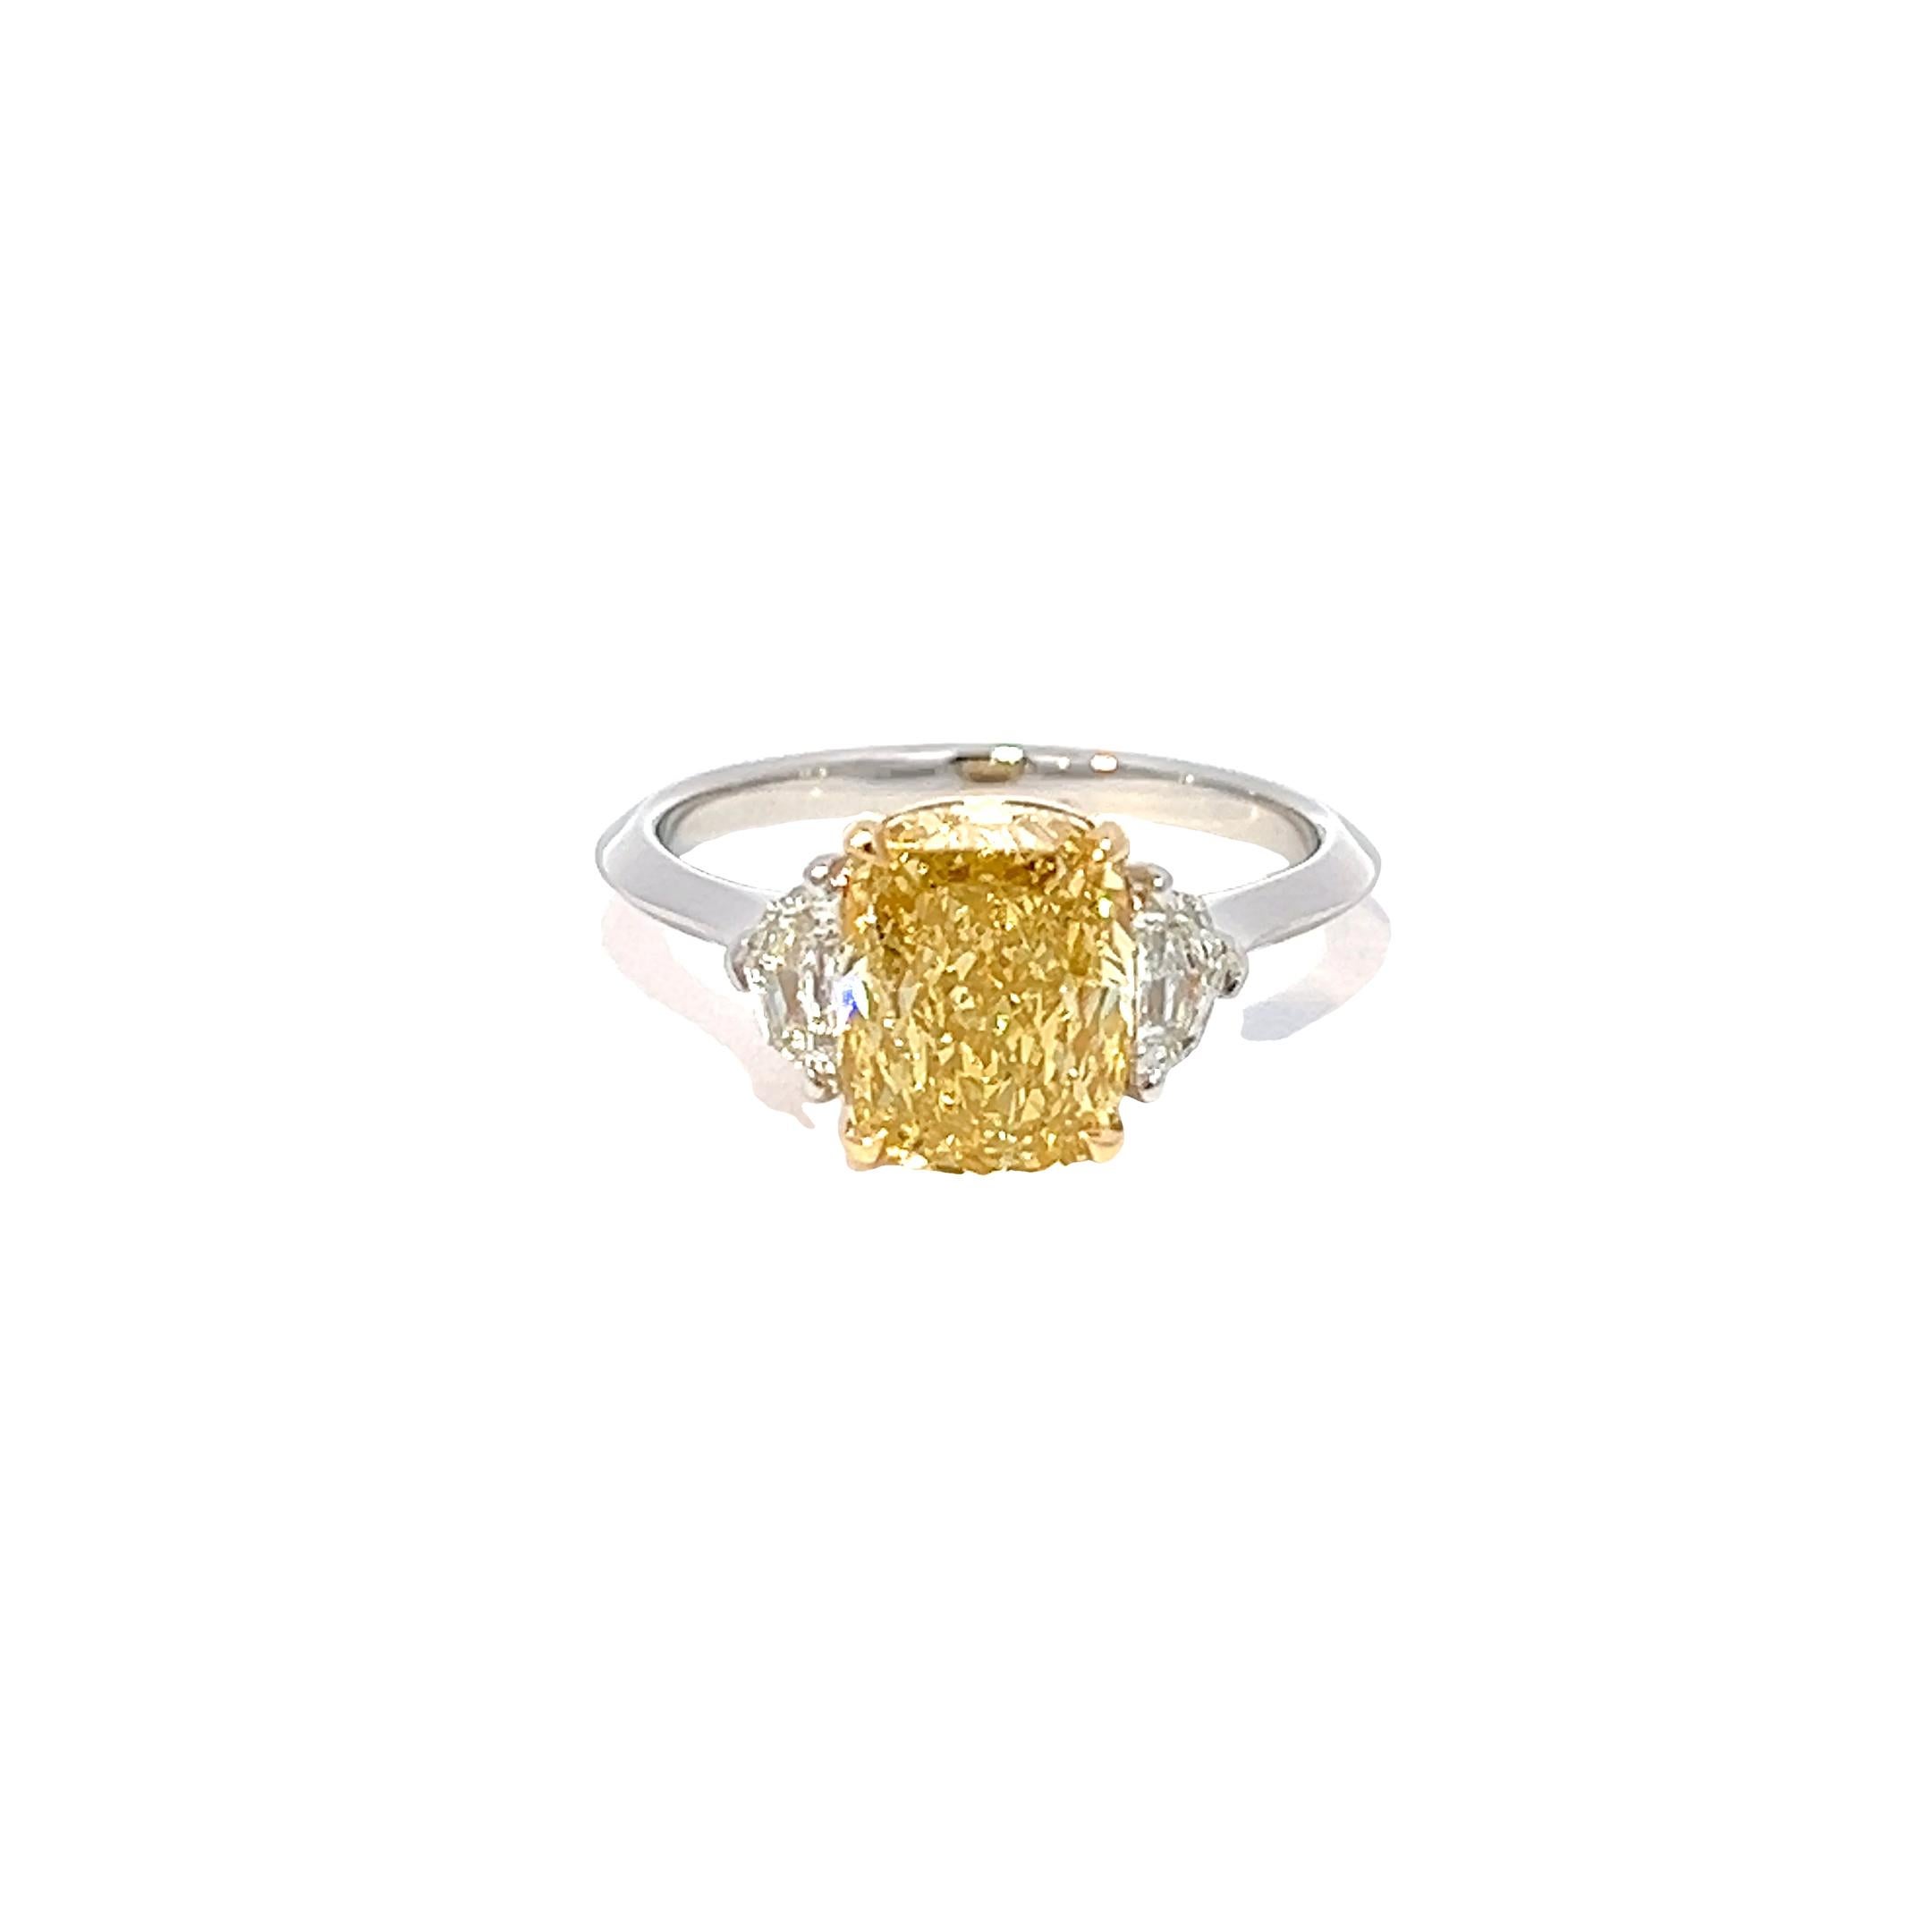 Behold, an exquisite diamond engagement ring, meticulously crafted to perfection! It boasts a spectacular 2.50CT Fancy Intense Yellow Diamond at the center, with SI1+++ clarity, set in 18K Yellow Gold. The center stone is flanked by two diamonds on